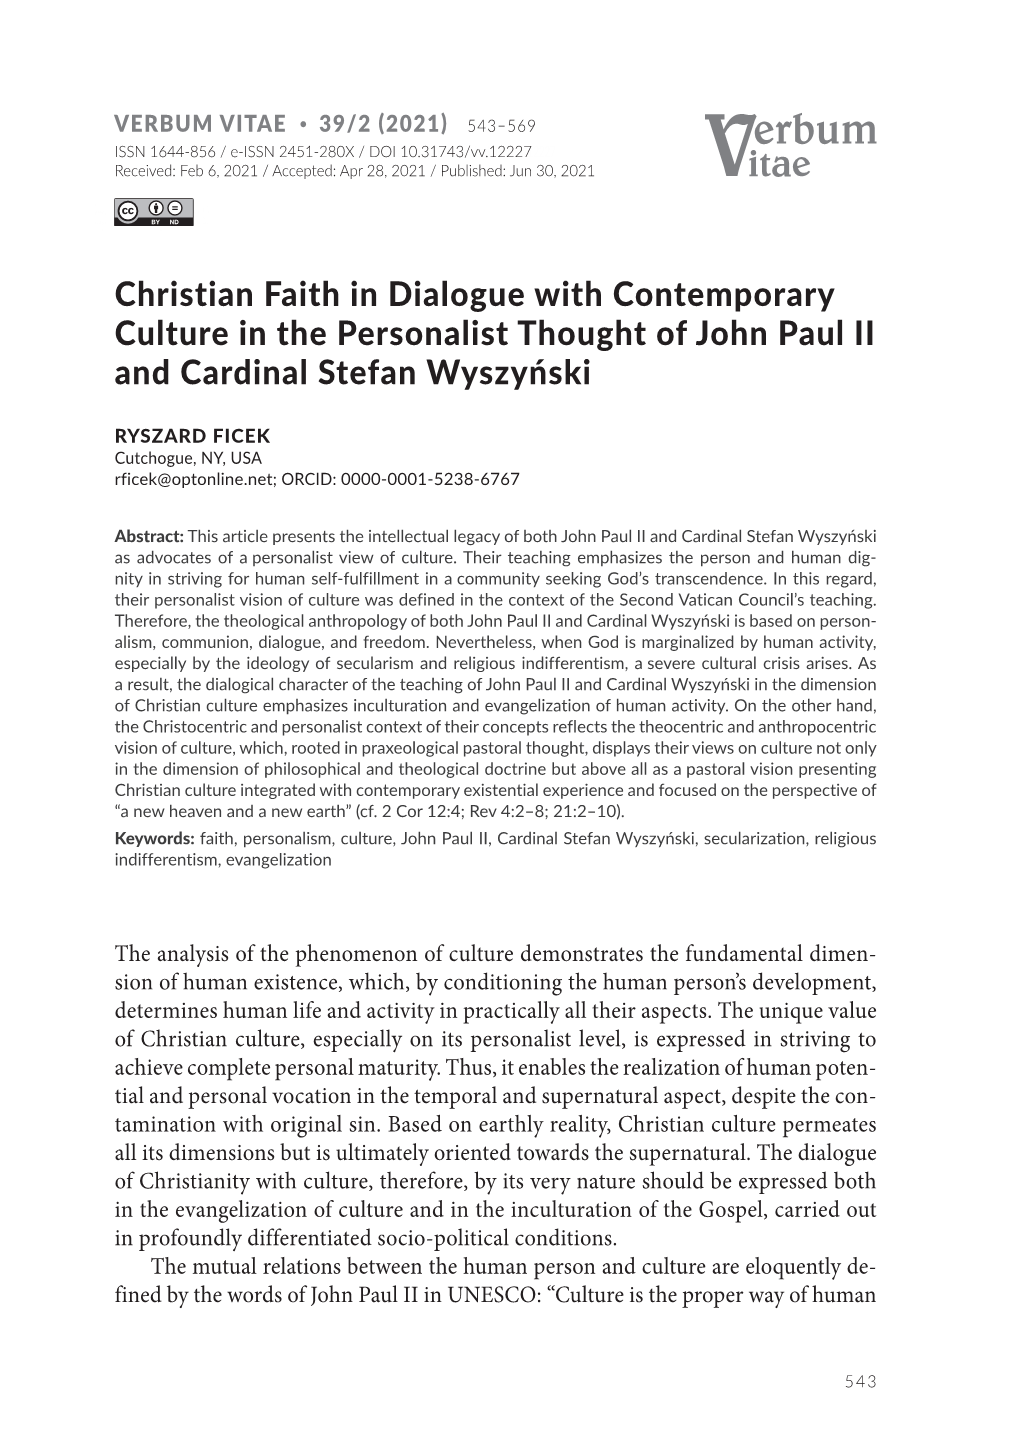 Christian Faith in Dialogue with Contemporary Culture in The